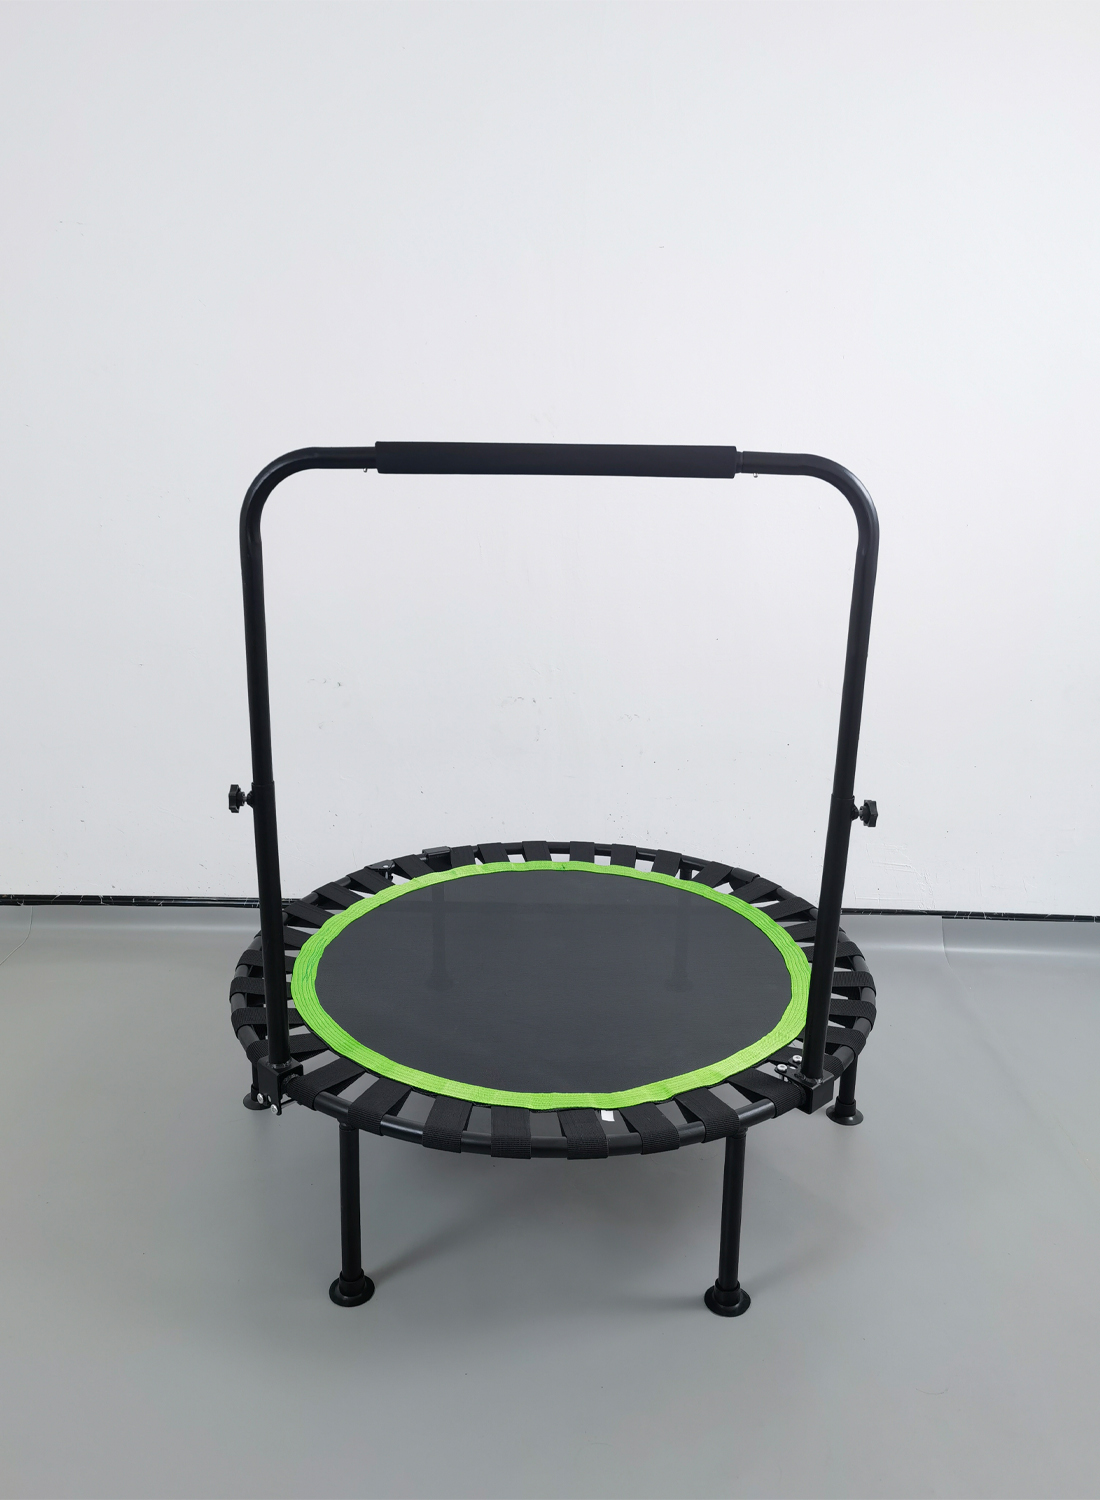 Foldable Mini Trampoline, 40 inches Fitness Trampoline with Bungees, U Shape Adjustable Foam Handle